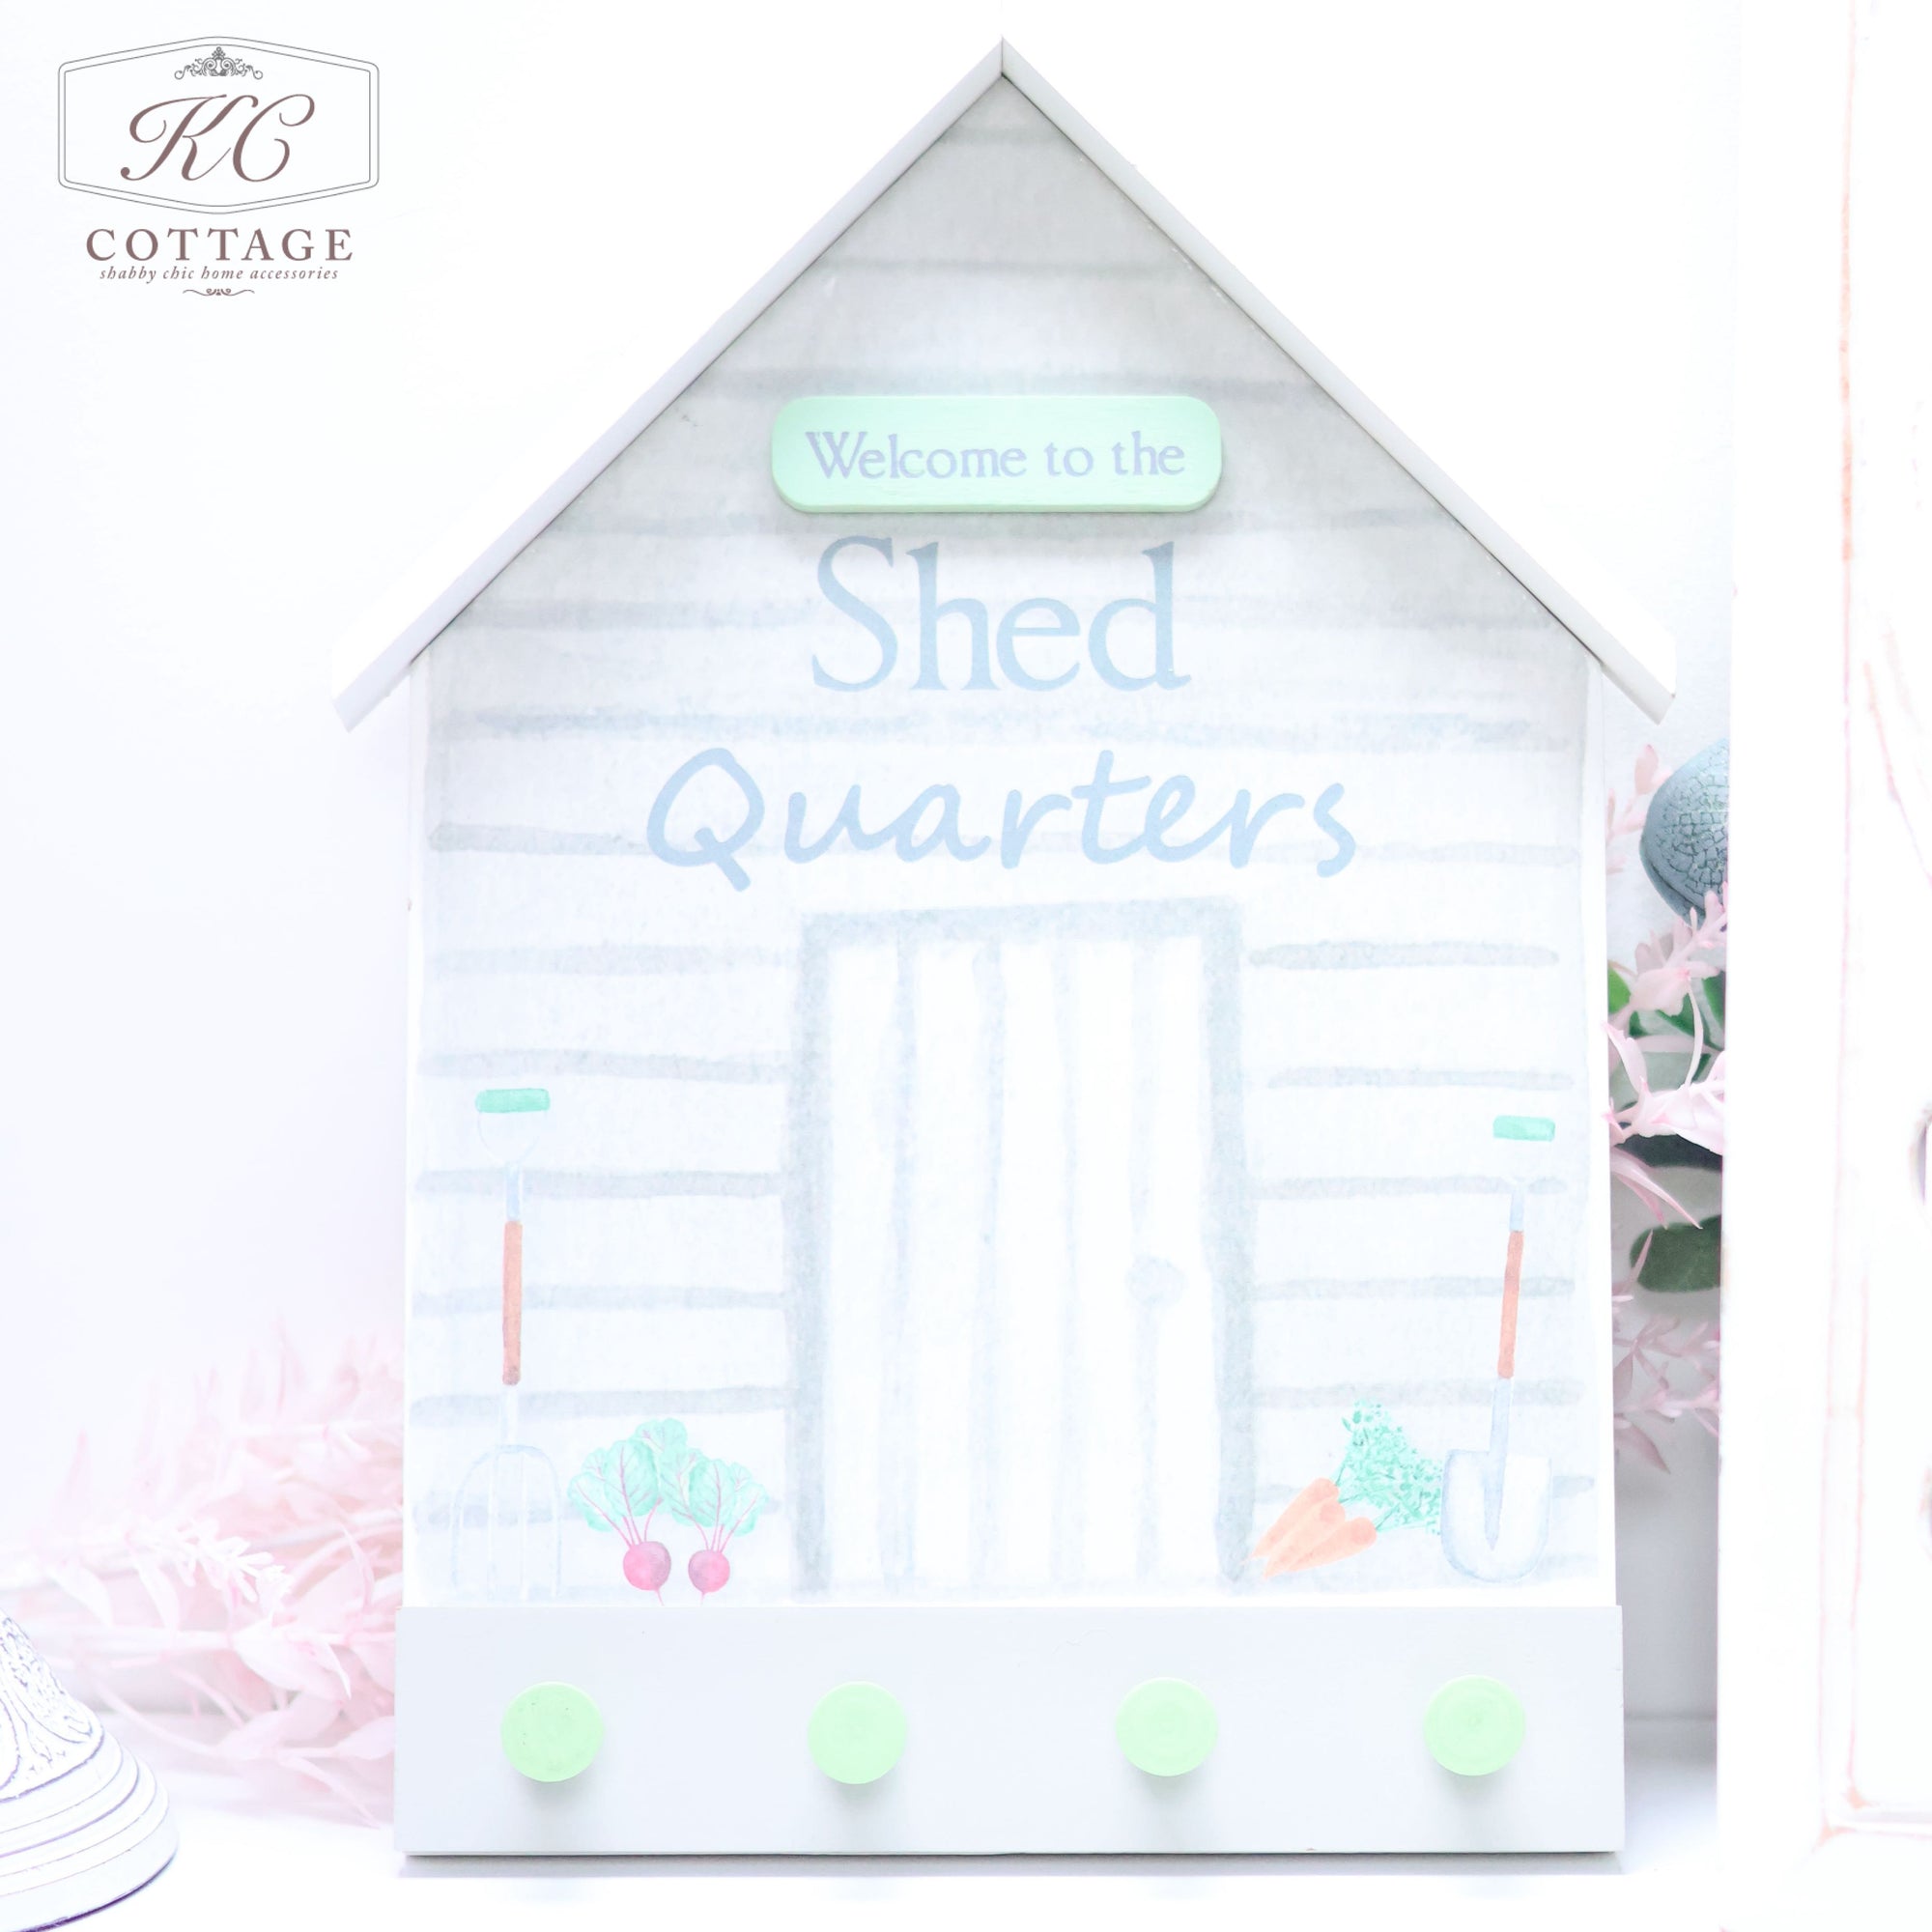 A Wooden Garden Shed Shaped Plaque with the phrase "Welcome to the Shed Quarters" written on the front. It features four green pegs at the bottom and a simple, light-colored design with small illustrations of gardening tools and vegetables—a charming piece of home decor.